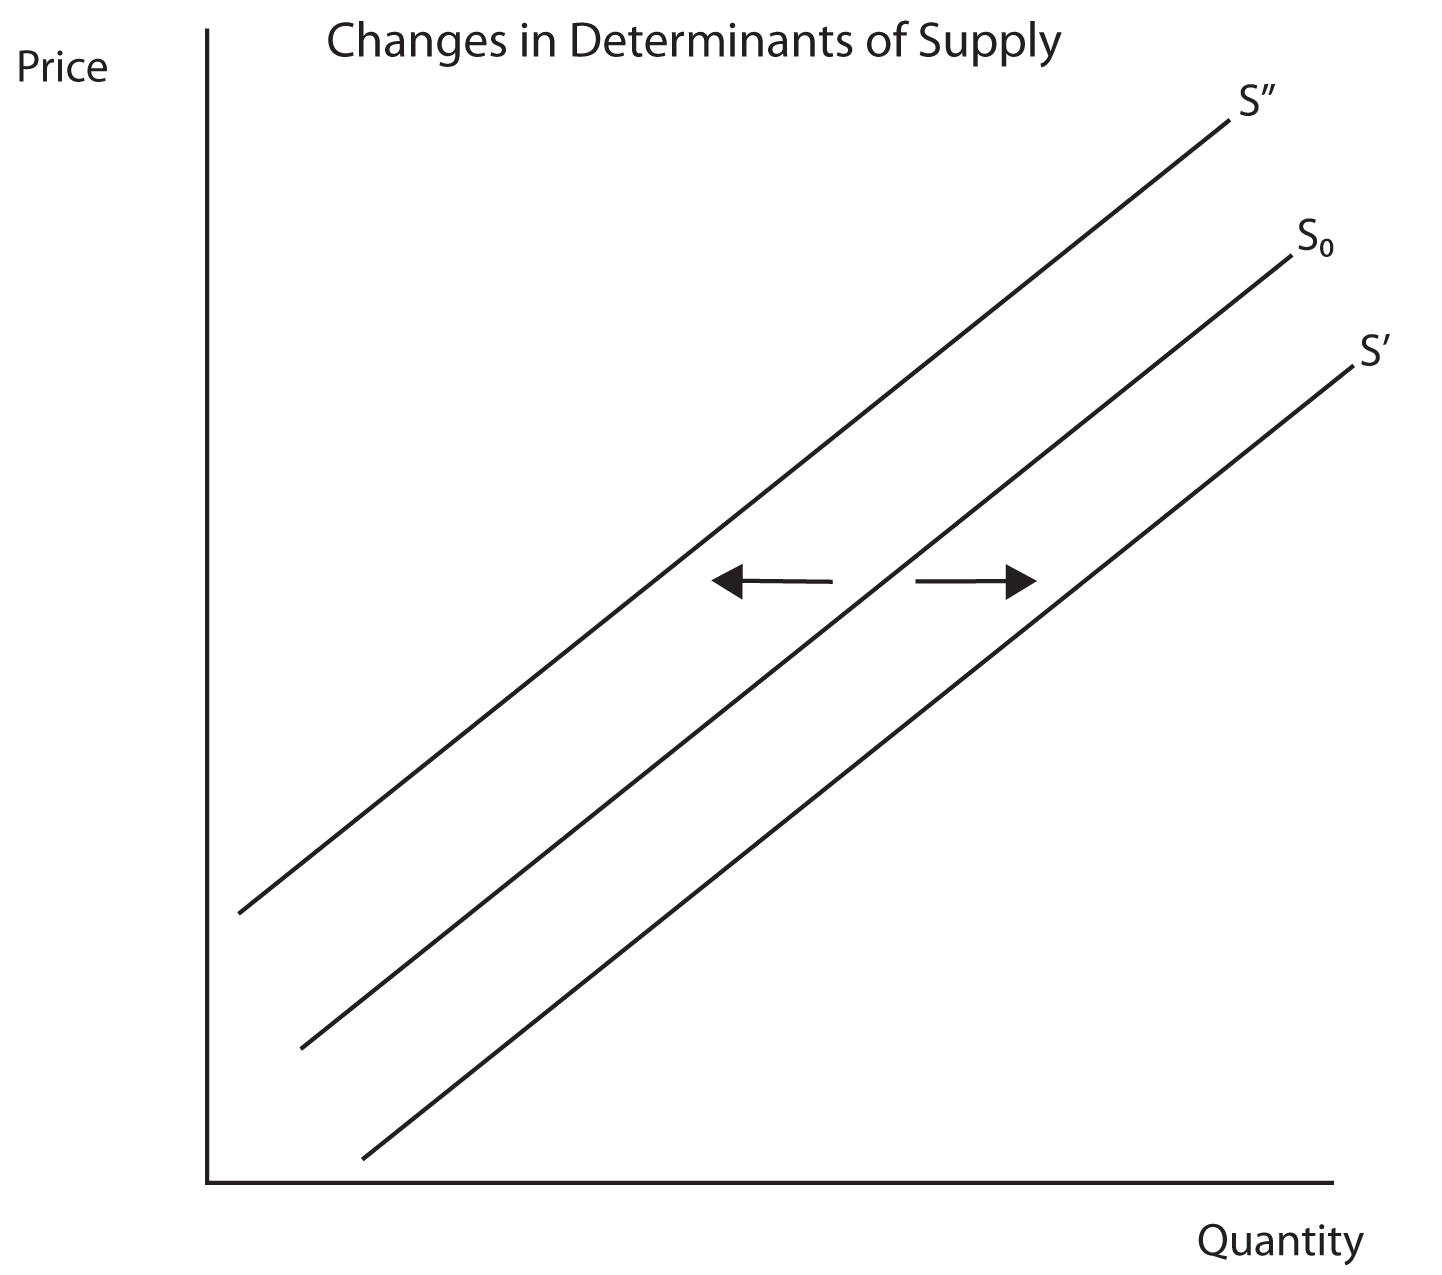 Description: Description: Image 1.10: Changes in Determinants of Supply. This image shows a graph with Price on the Y axis and Quantity on the X axis.  A 45 degree line labeled S0 slopes upward from the origin.  A parallel line to its right is labeled S Prime (representing an increase in supply) and a parallel line to its left is labeled S Prime Prime (representing a decrease in supply).  